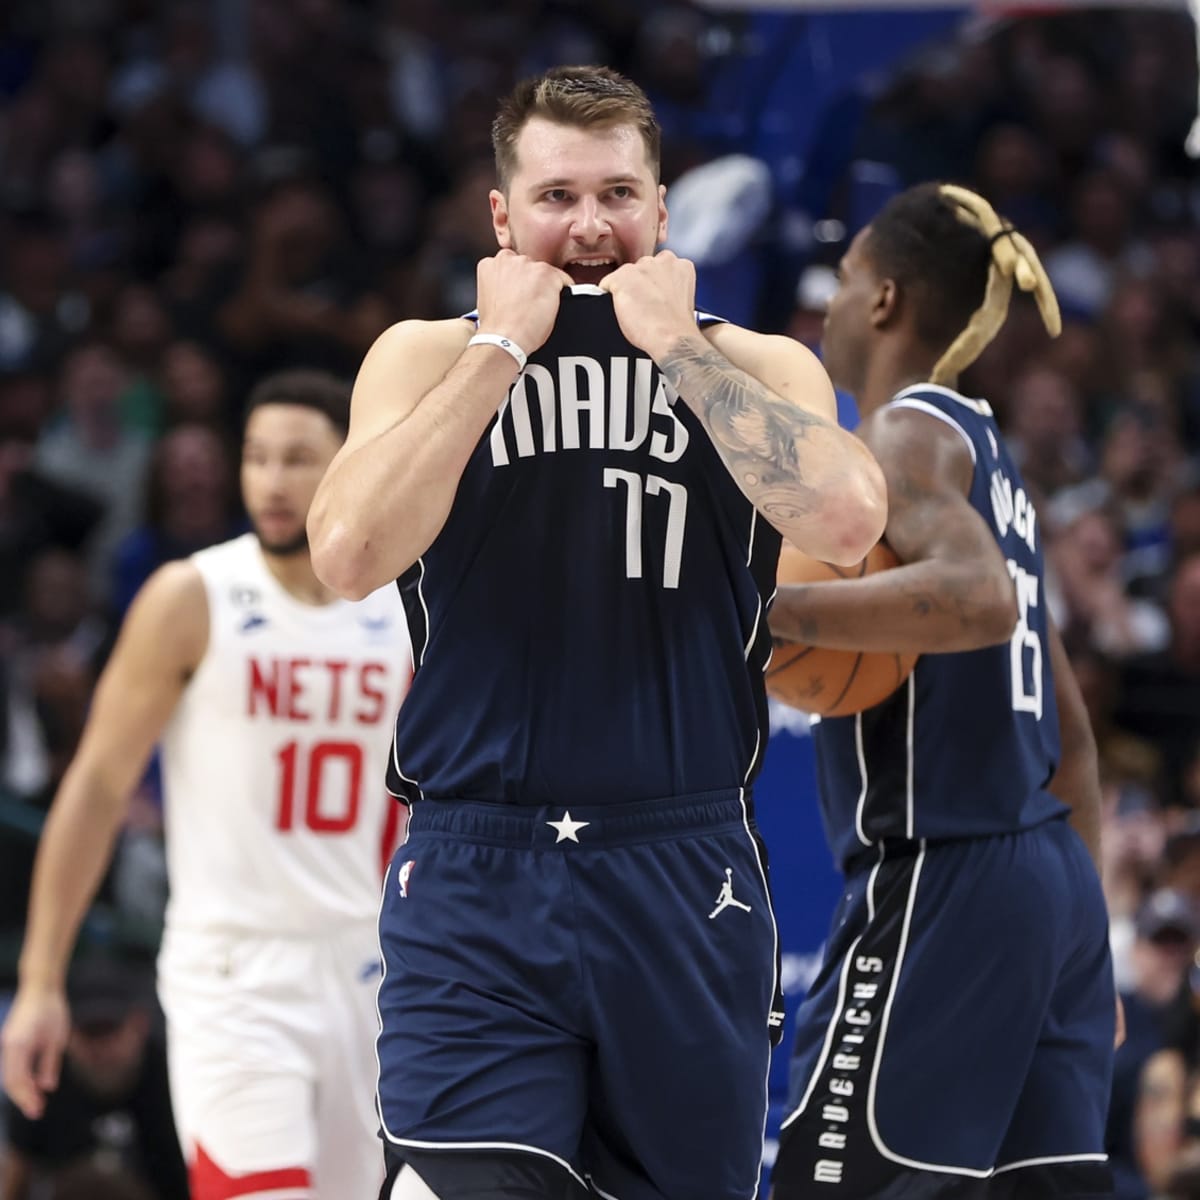 I feel it's Miami” - Bill Simmons names the next destination for Luka Doncic  - Basketball Network - Your daily dose of basketball